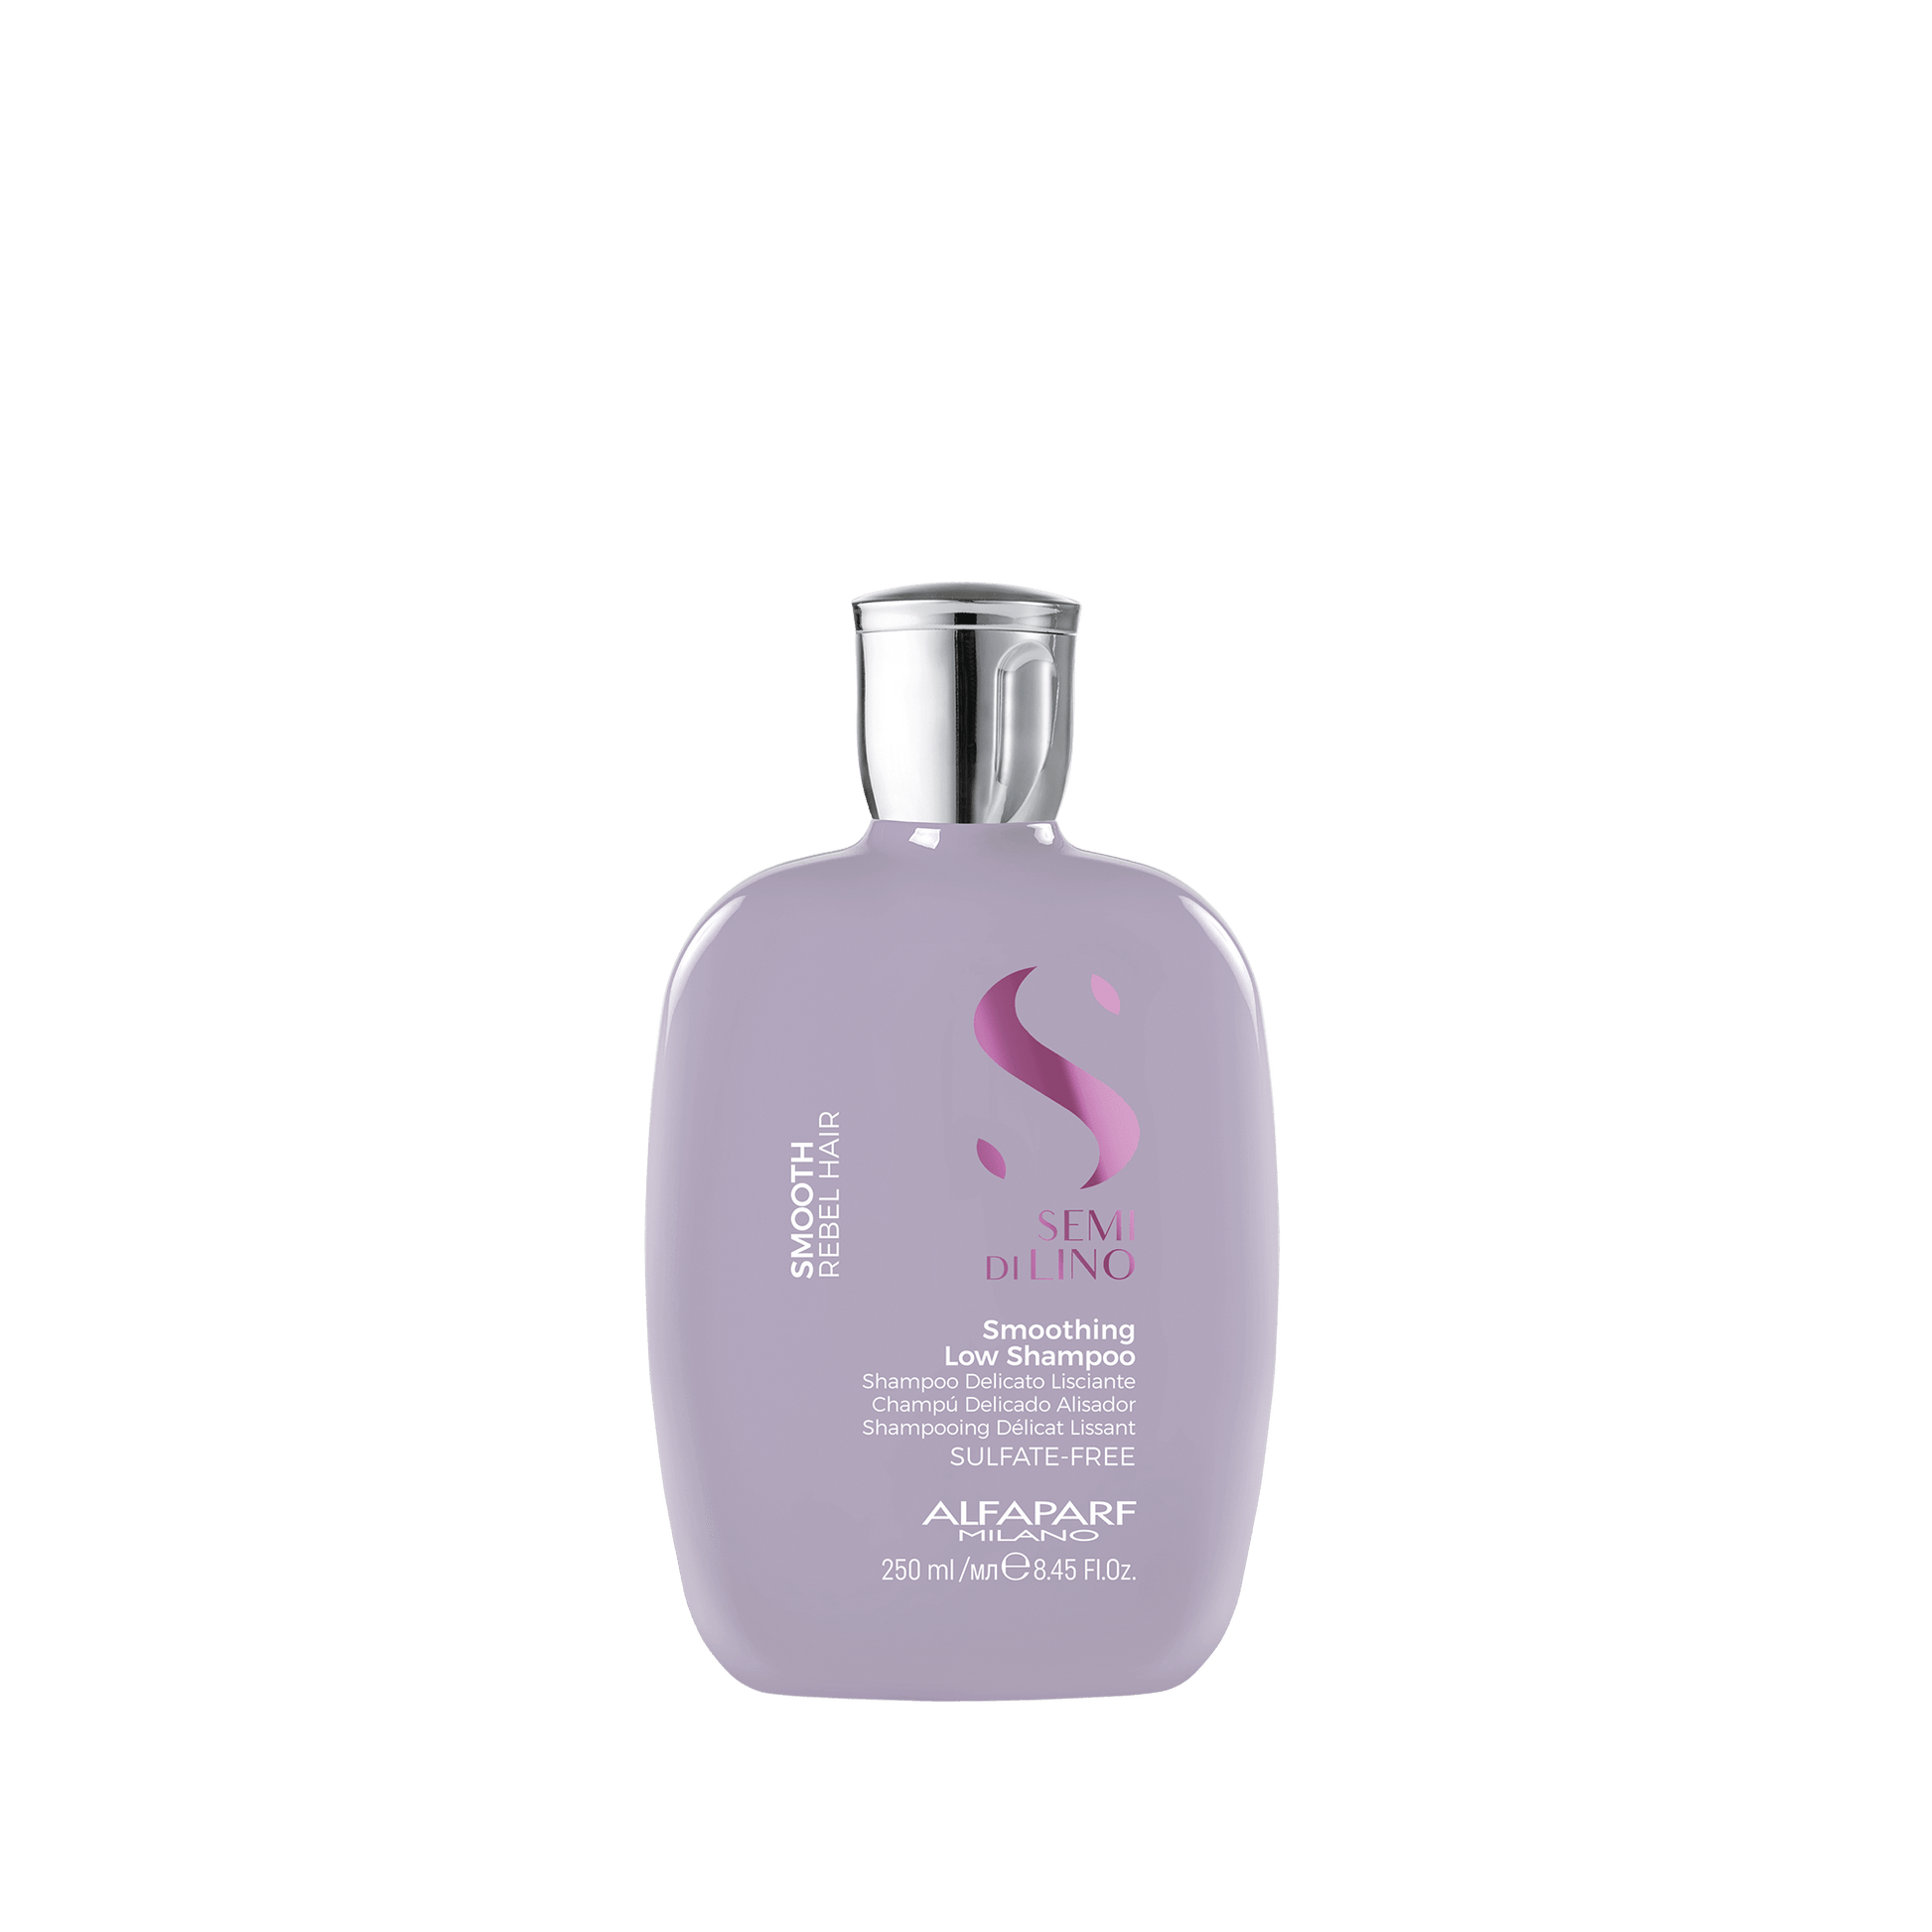 Smoothing Low Shampoo 250ml best shampoo and conditioner for frizzy 